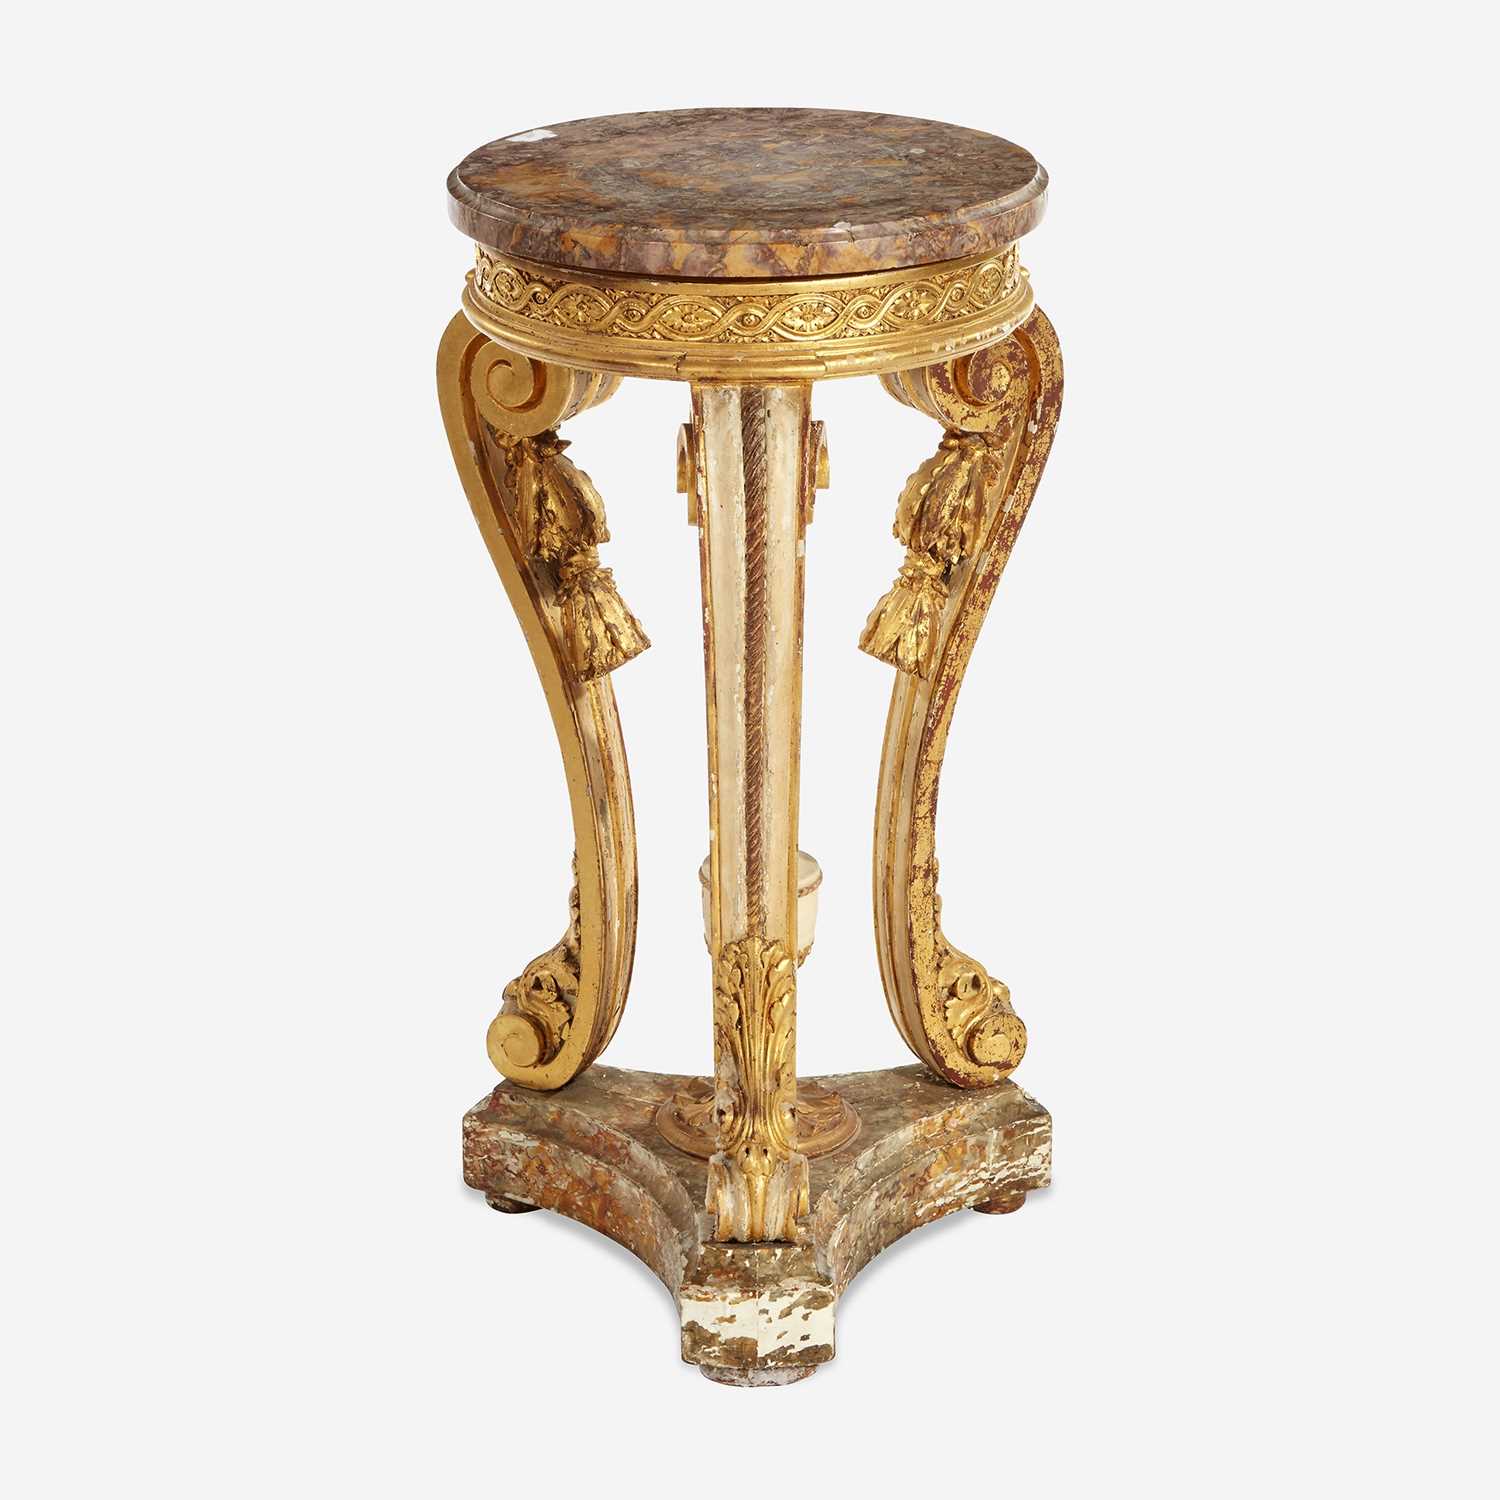 Lot 9 - A Louis XV Style White-Painted and Parcel-Gilt Marble-Topped Jardinière